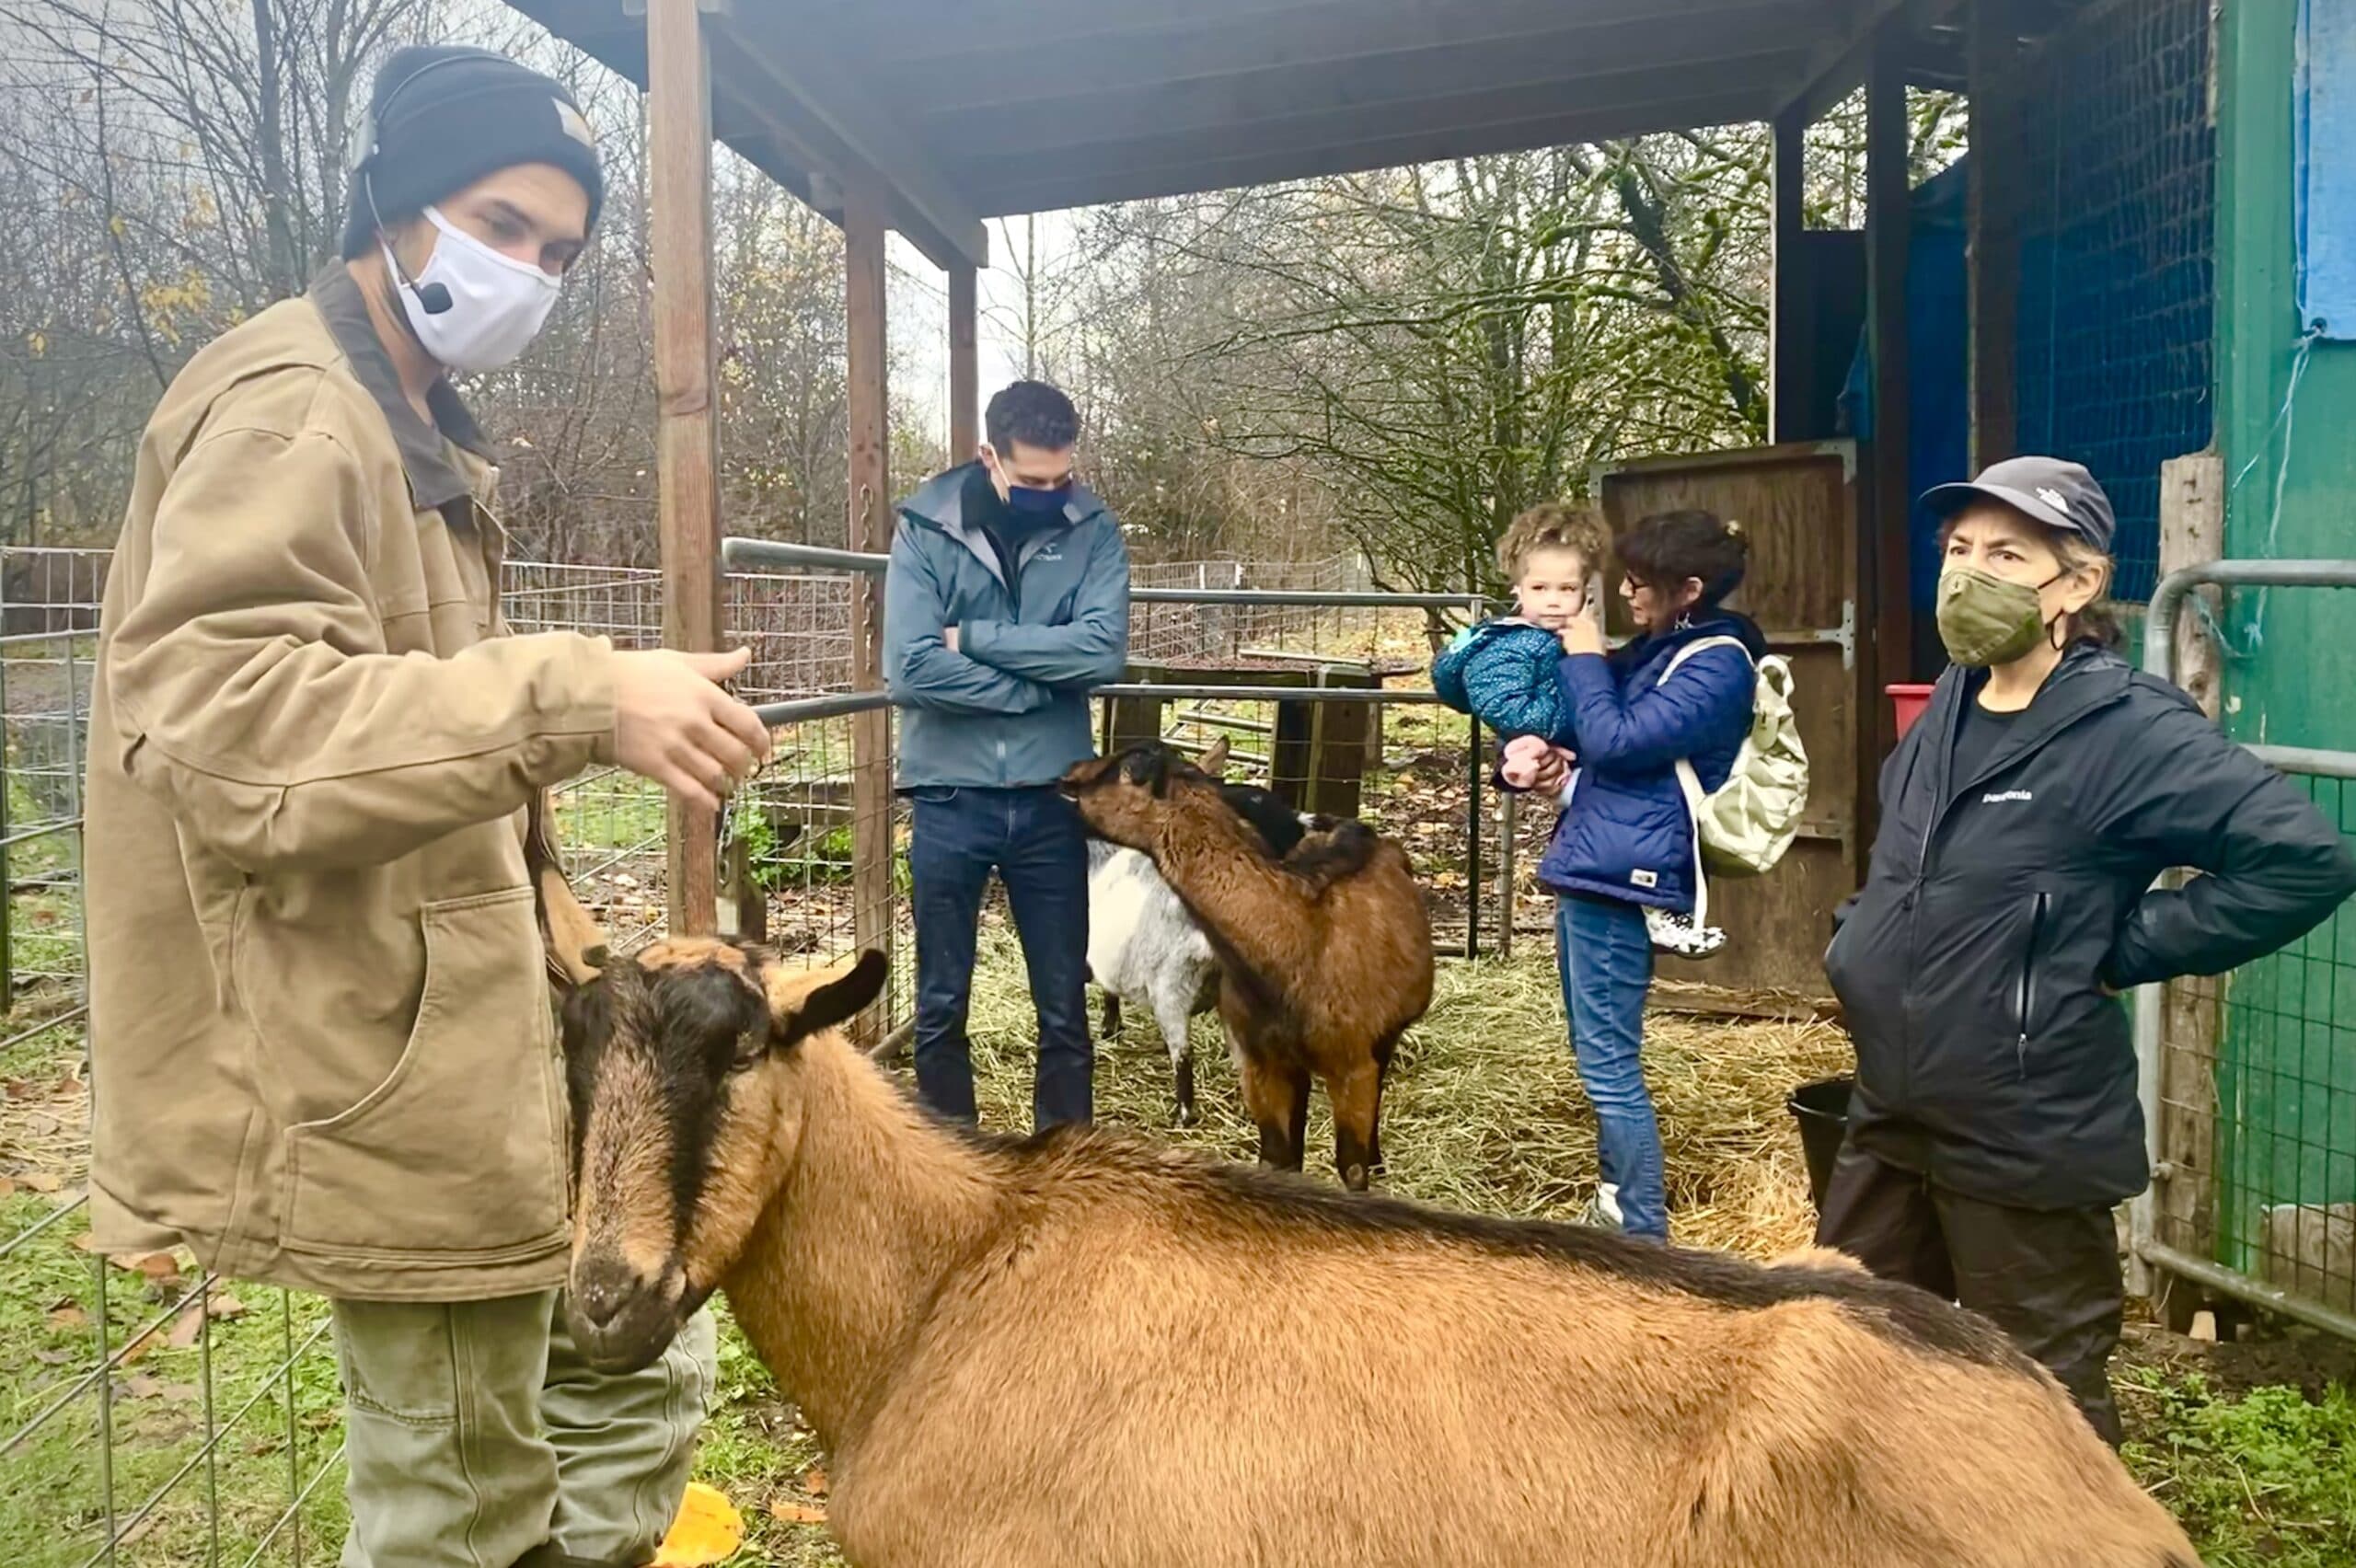 Anthony leading a farm tour, getting nibbles from Lucky (or Skippy) the goat. Tour attendees stand nearby learning from Anthony and the goats.